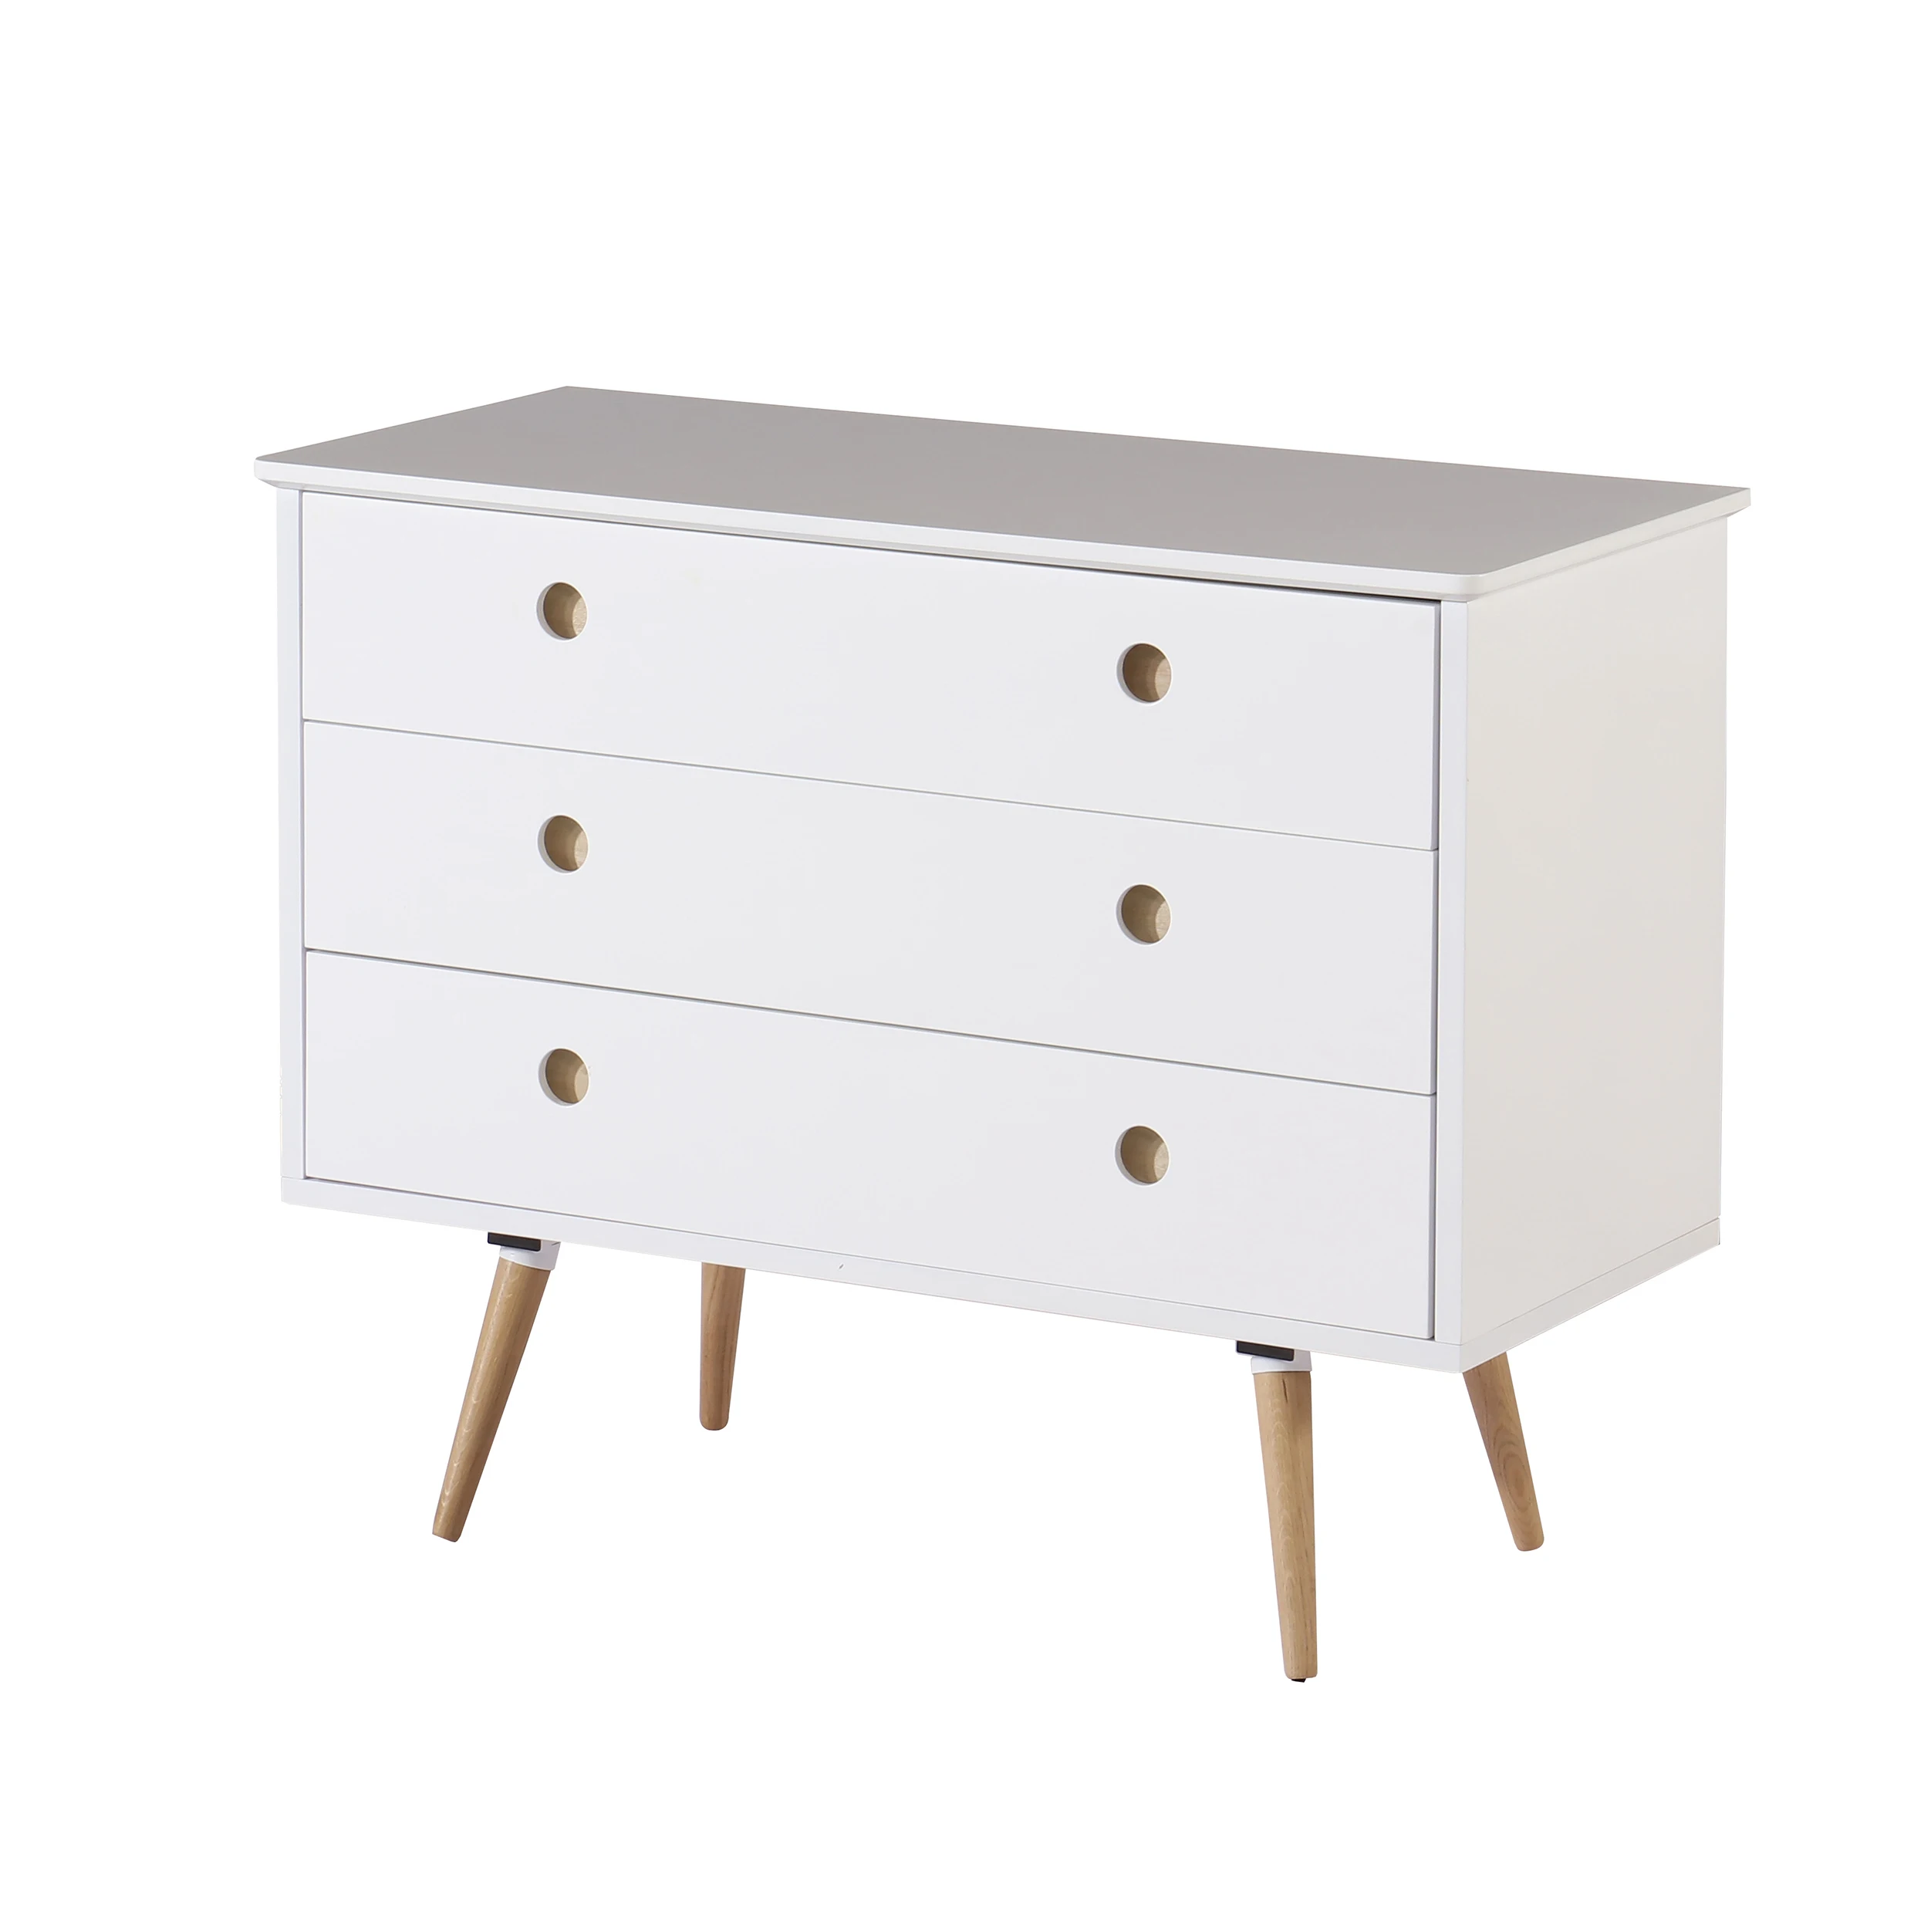 Scandinavian Furniture Wooden Chest Of Drawers 3 Drawer Wood Small